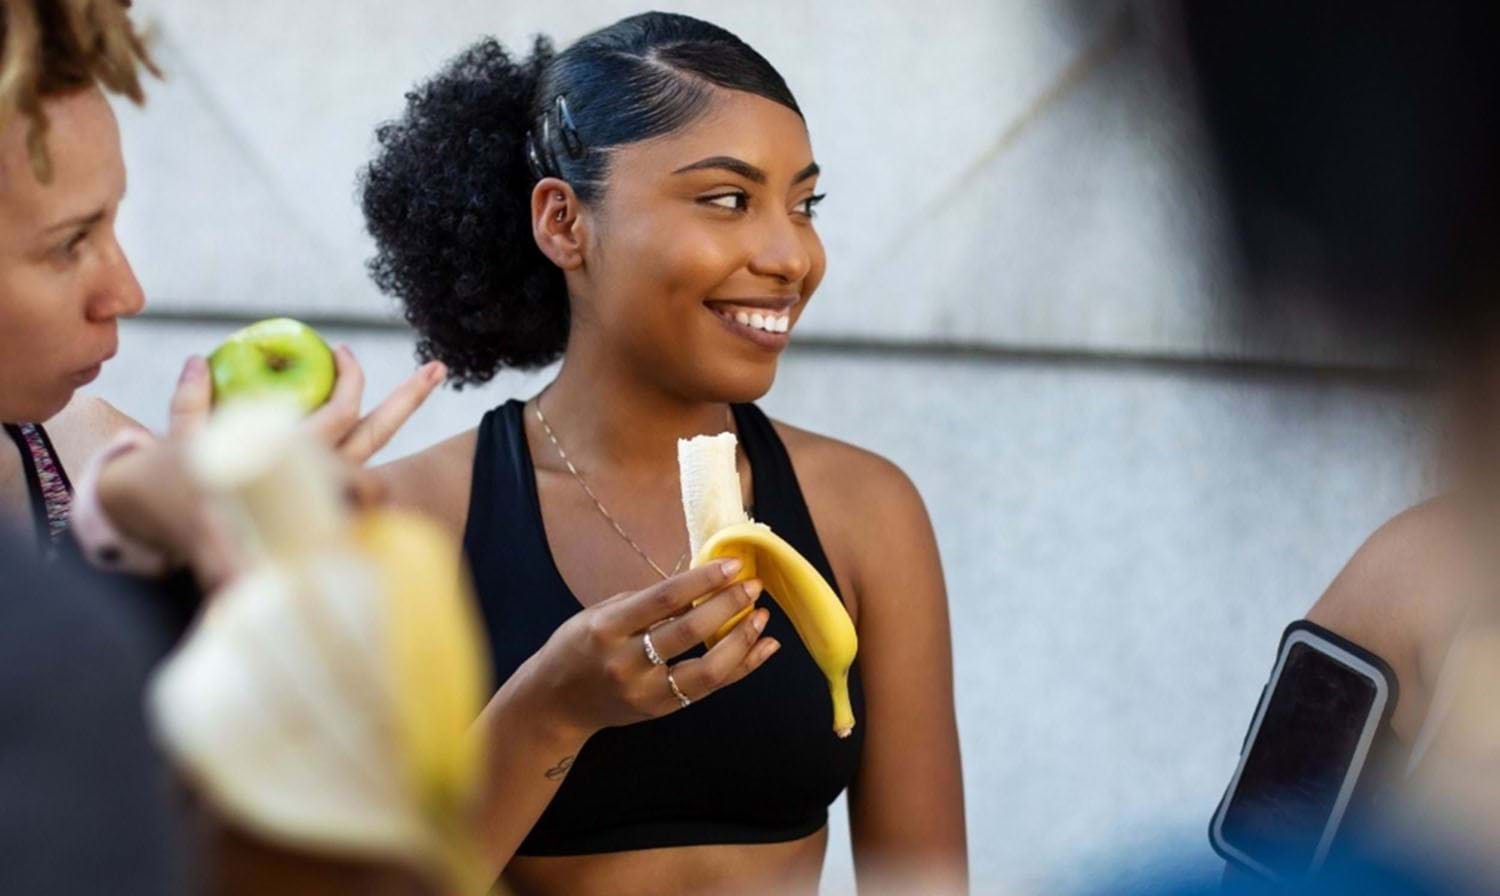 smiling lady with banana